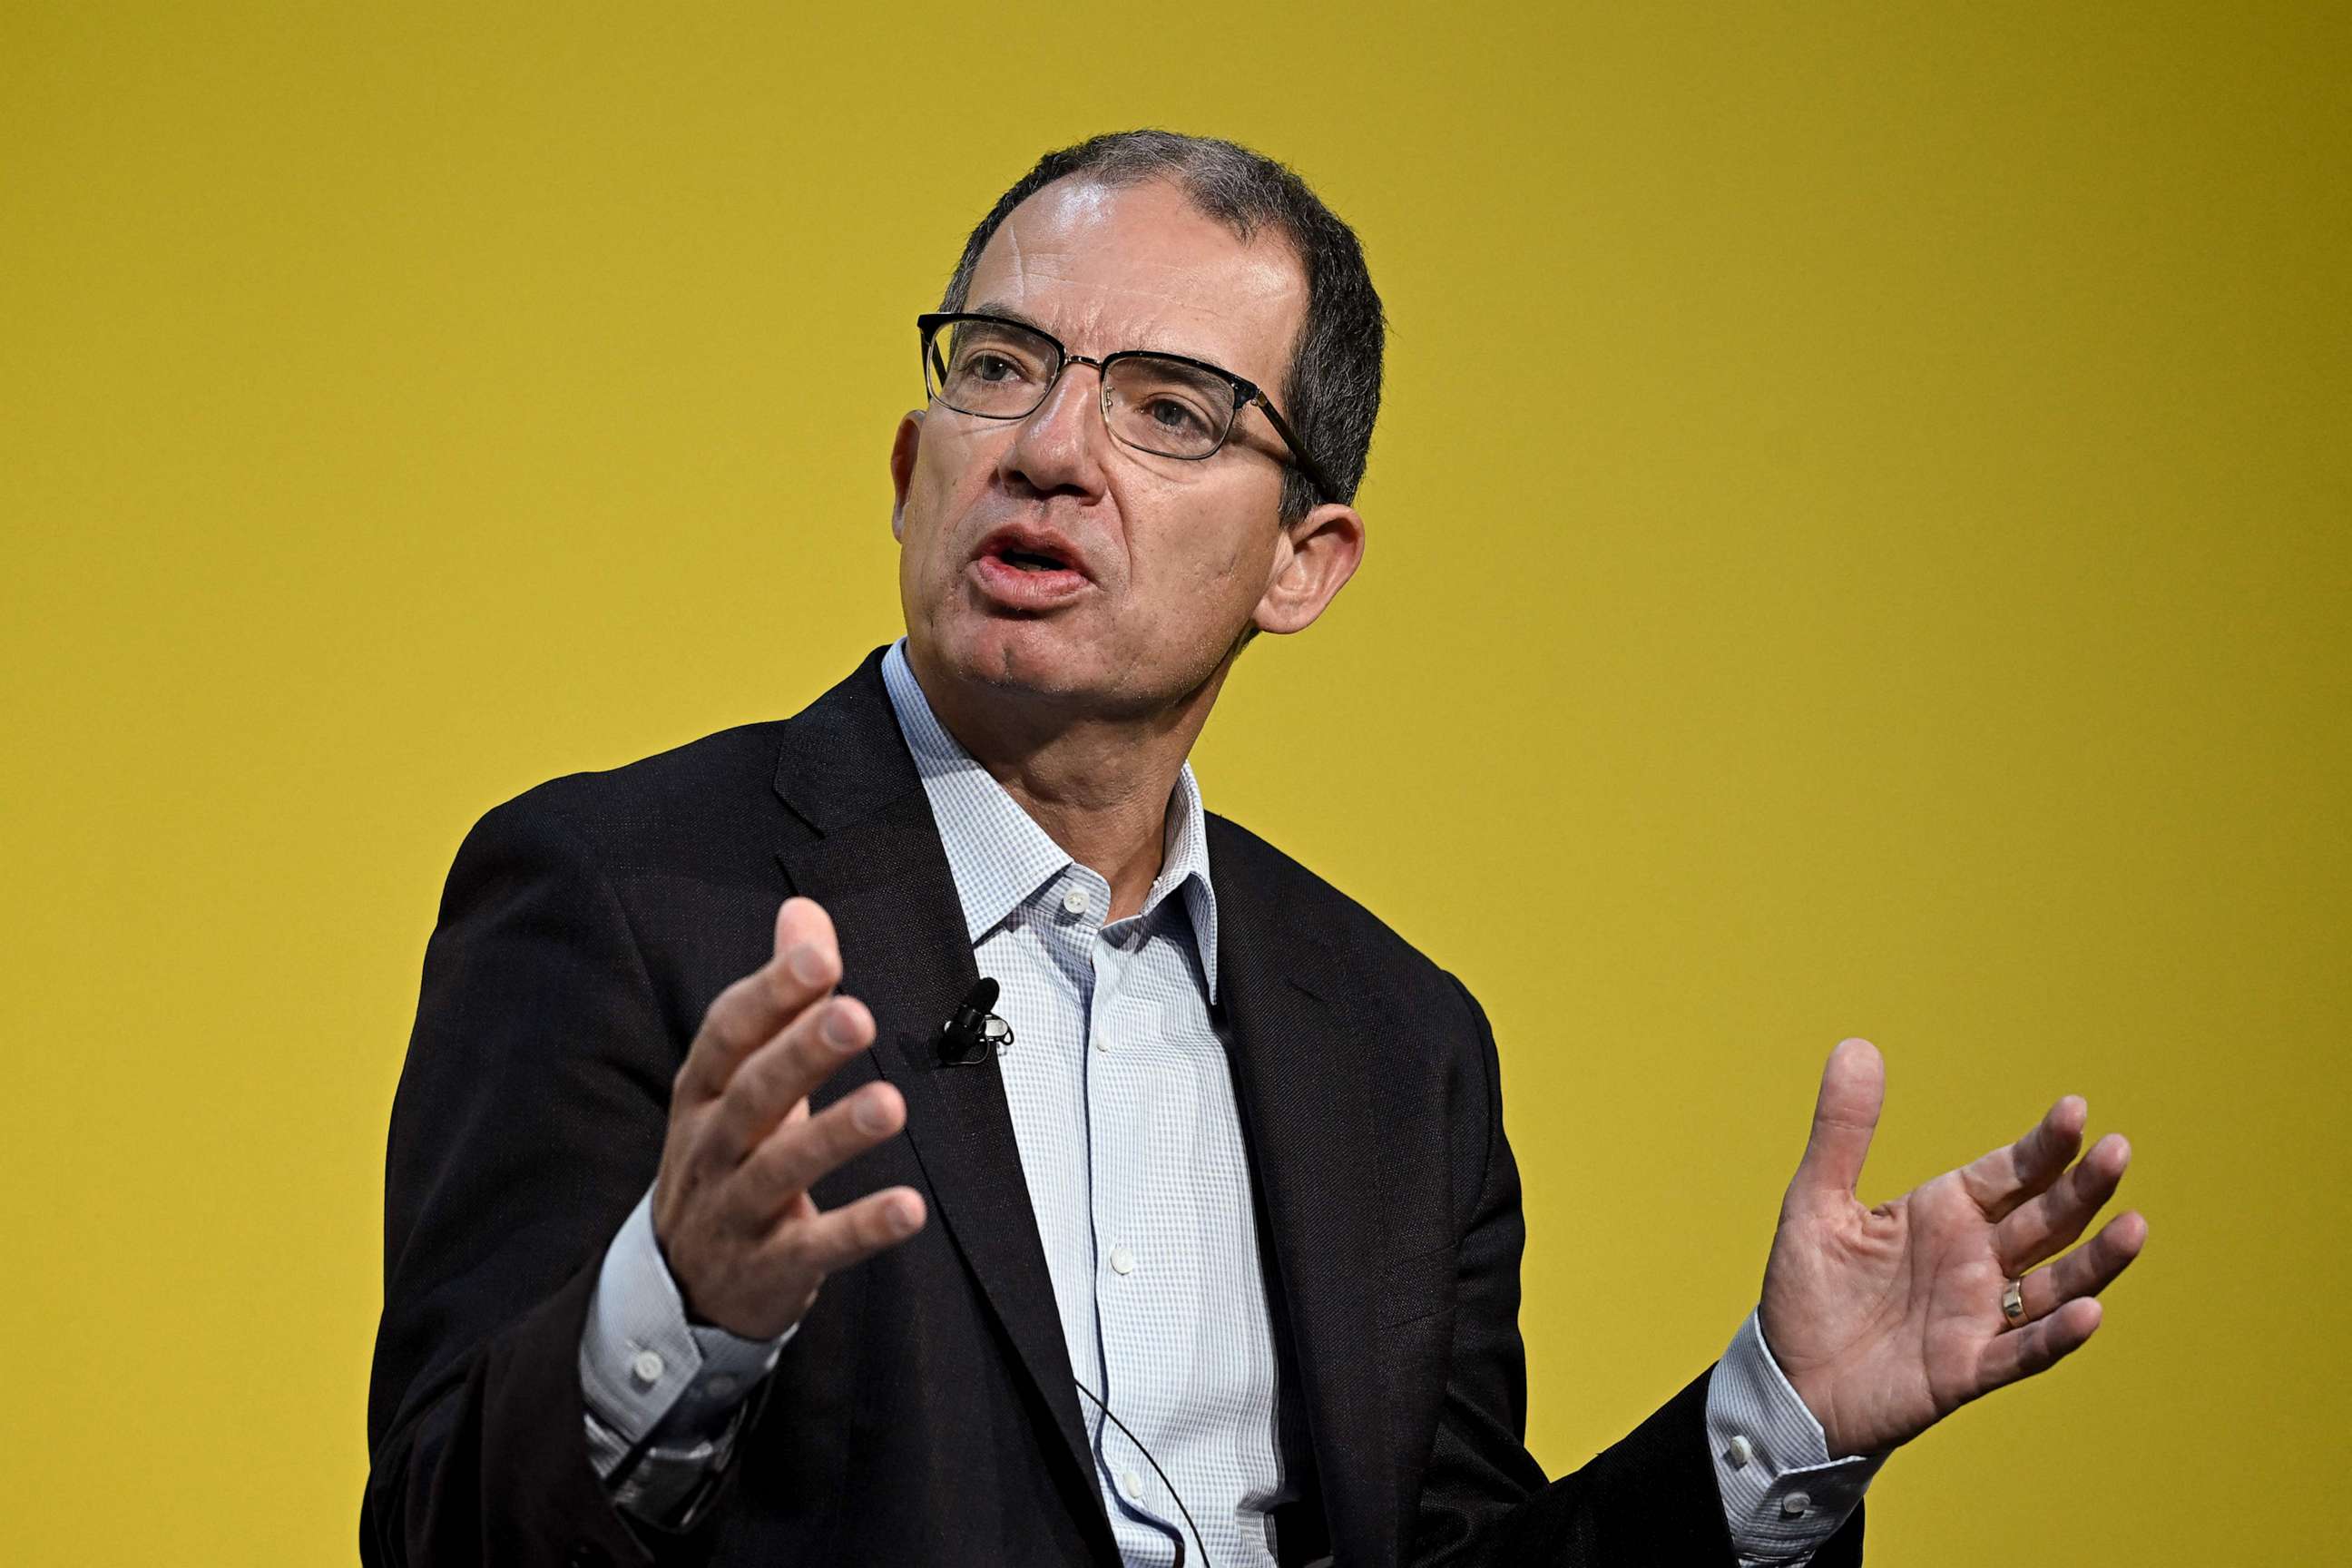 PHOTO: Moderna pharmaceutical and biotechnology company's CEO Stephane Bancel speaks during a session of the World Economic Forum (WEF) annual meeting in Davos, Jan. 18, 2023.